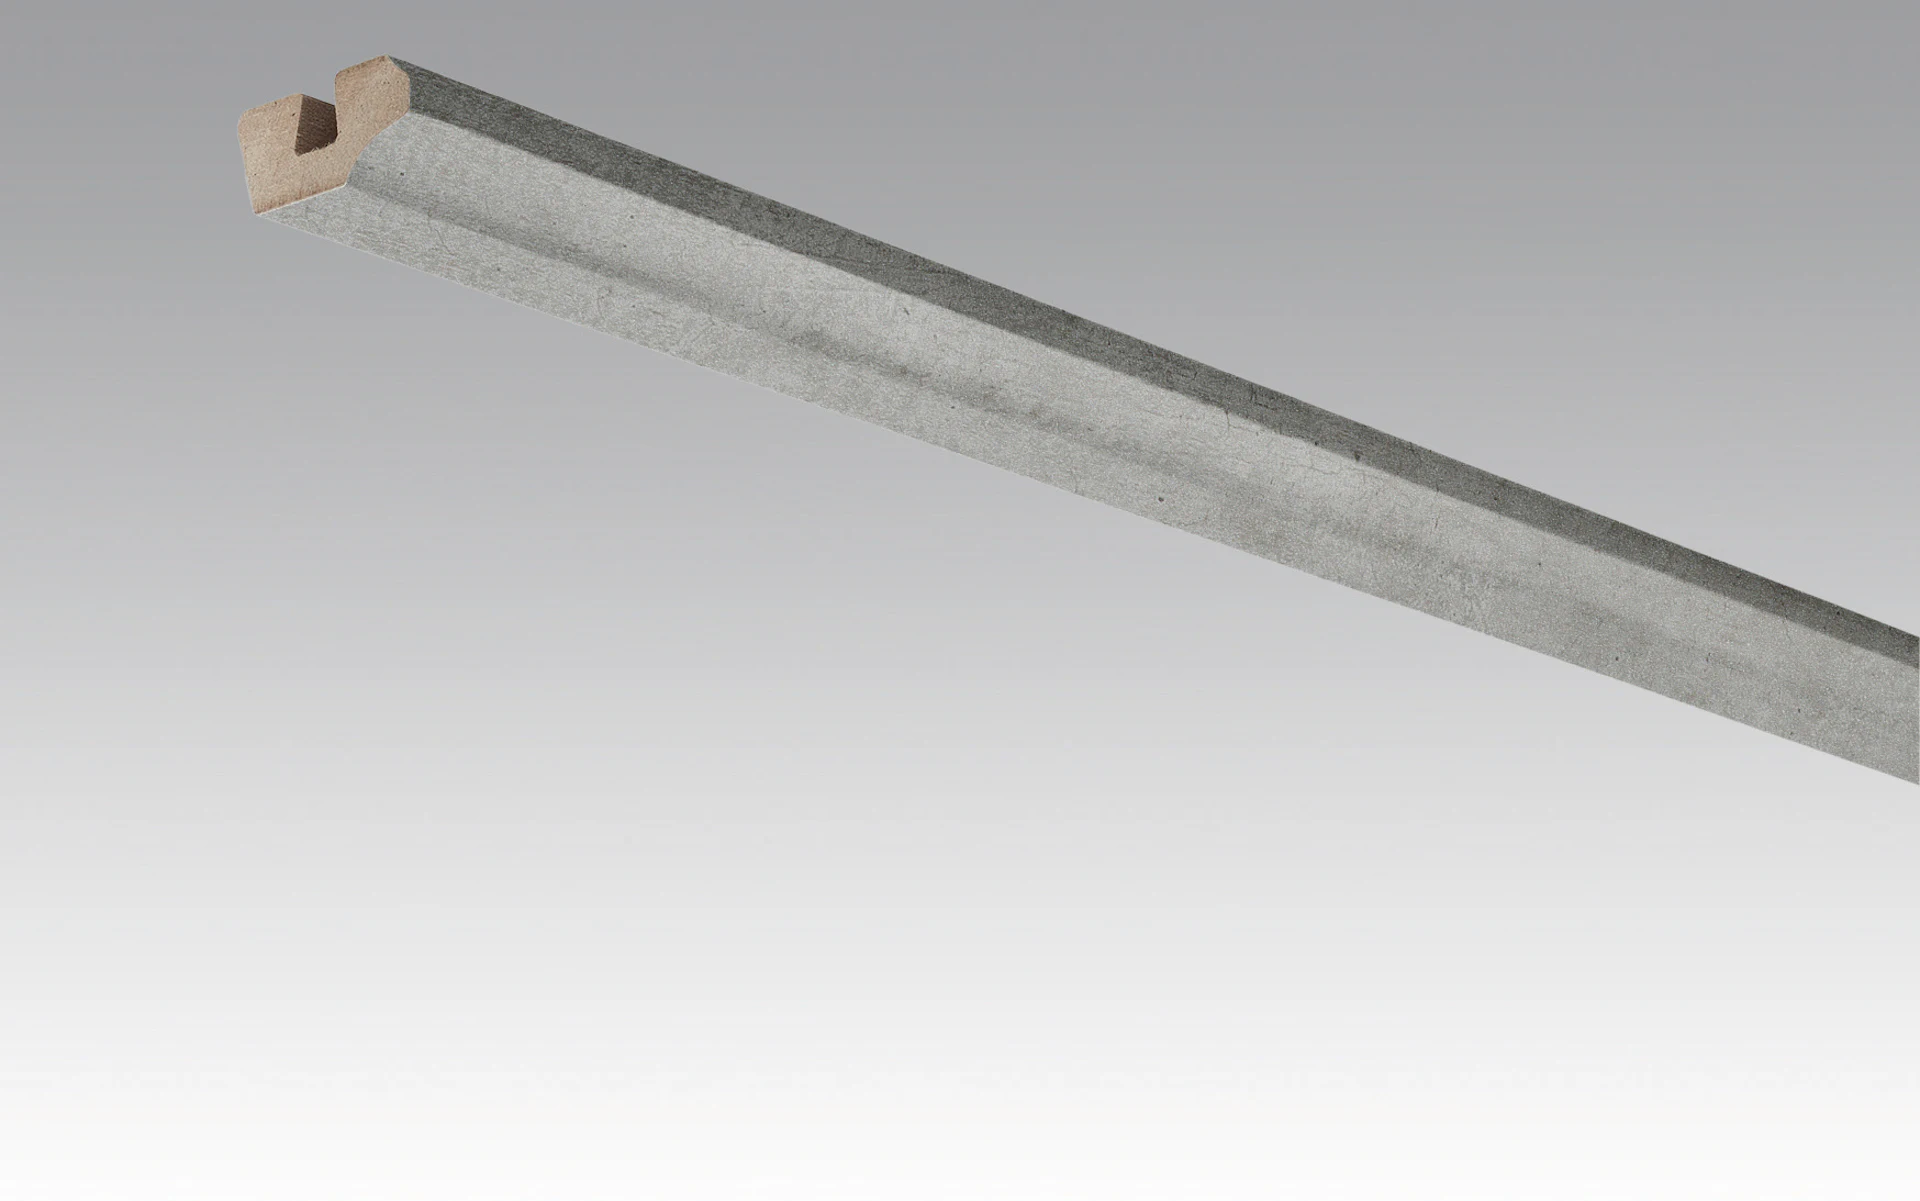 MEISTER Skirting Boards Ceiling Trims Concrete 4045 - 2380 x 38 x 19 mm (200031-2380-04045)